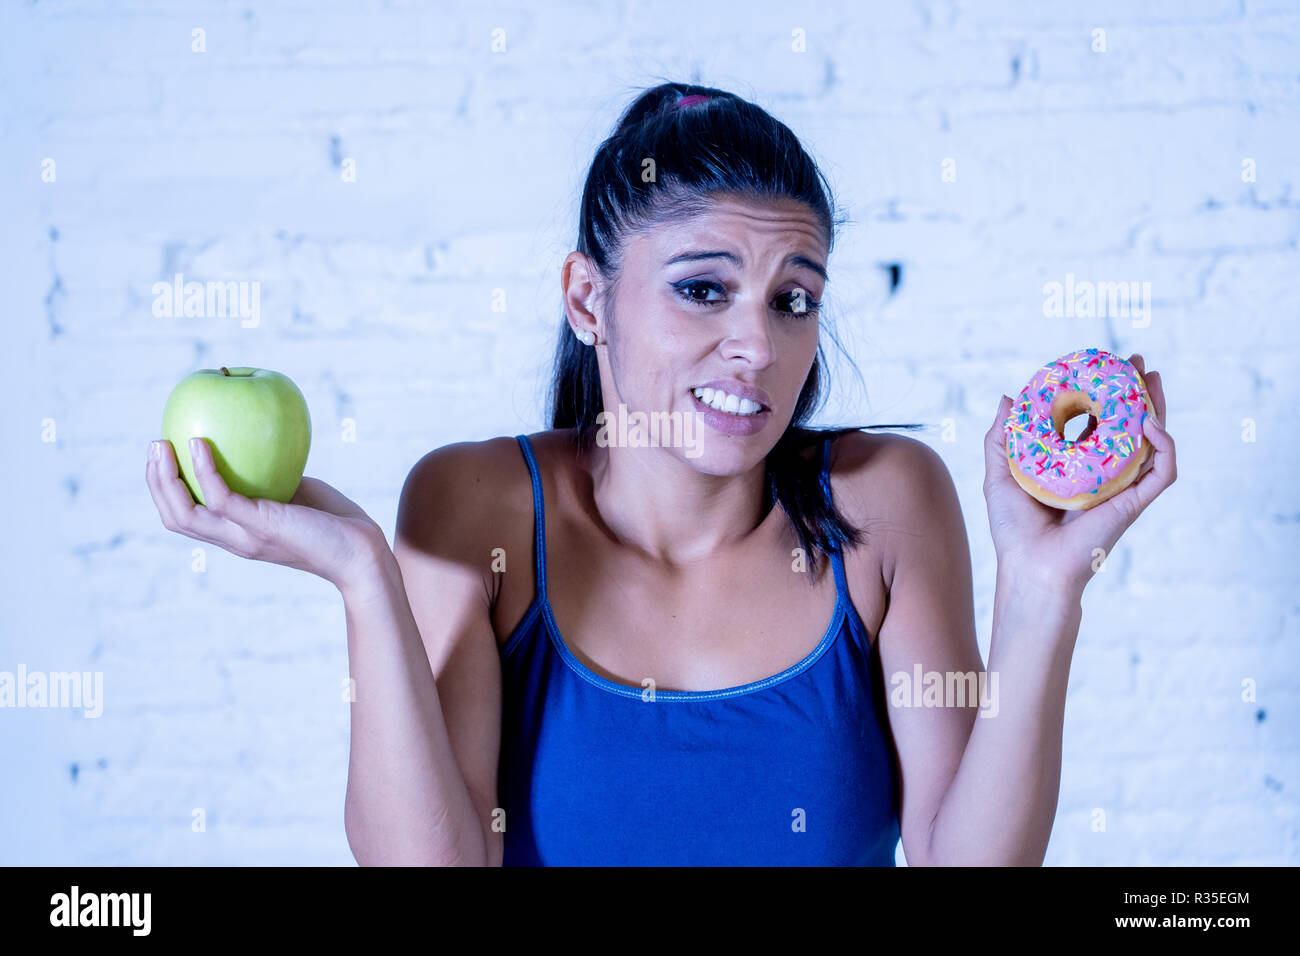 Beautiful young woman tempted having to make choice between apple and doughnut in healthy unhealthy food, detox eating, calories and diet concept. Stock Photo